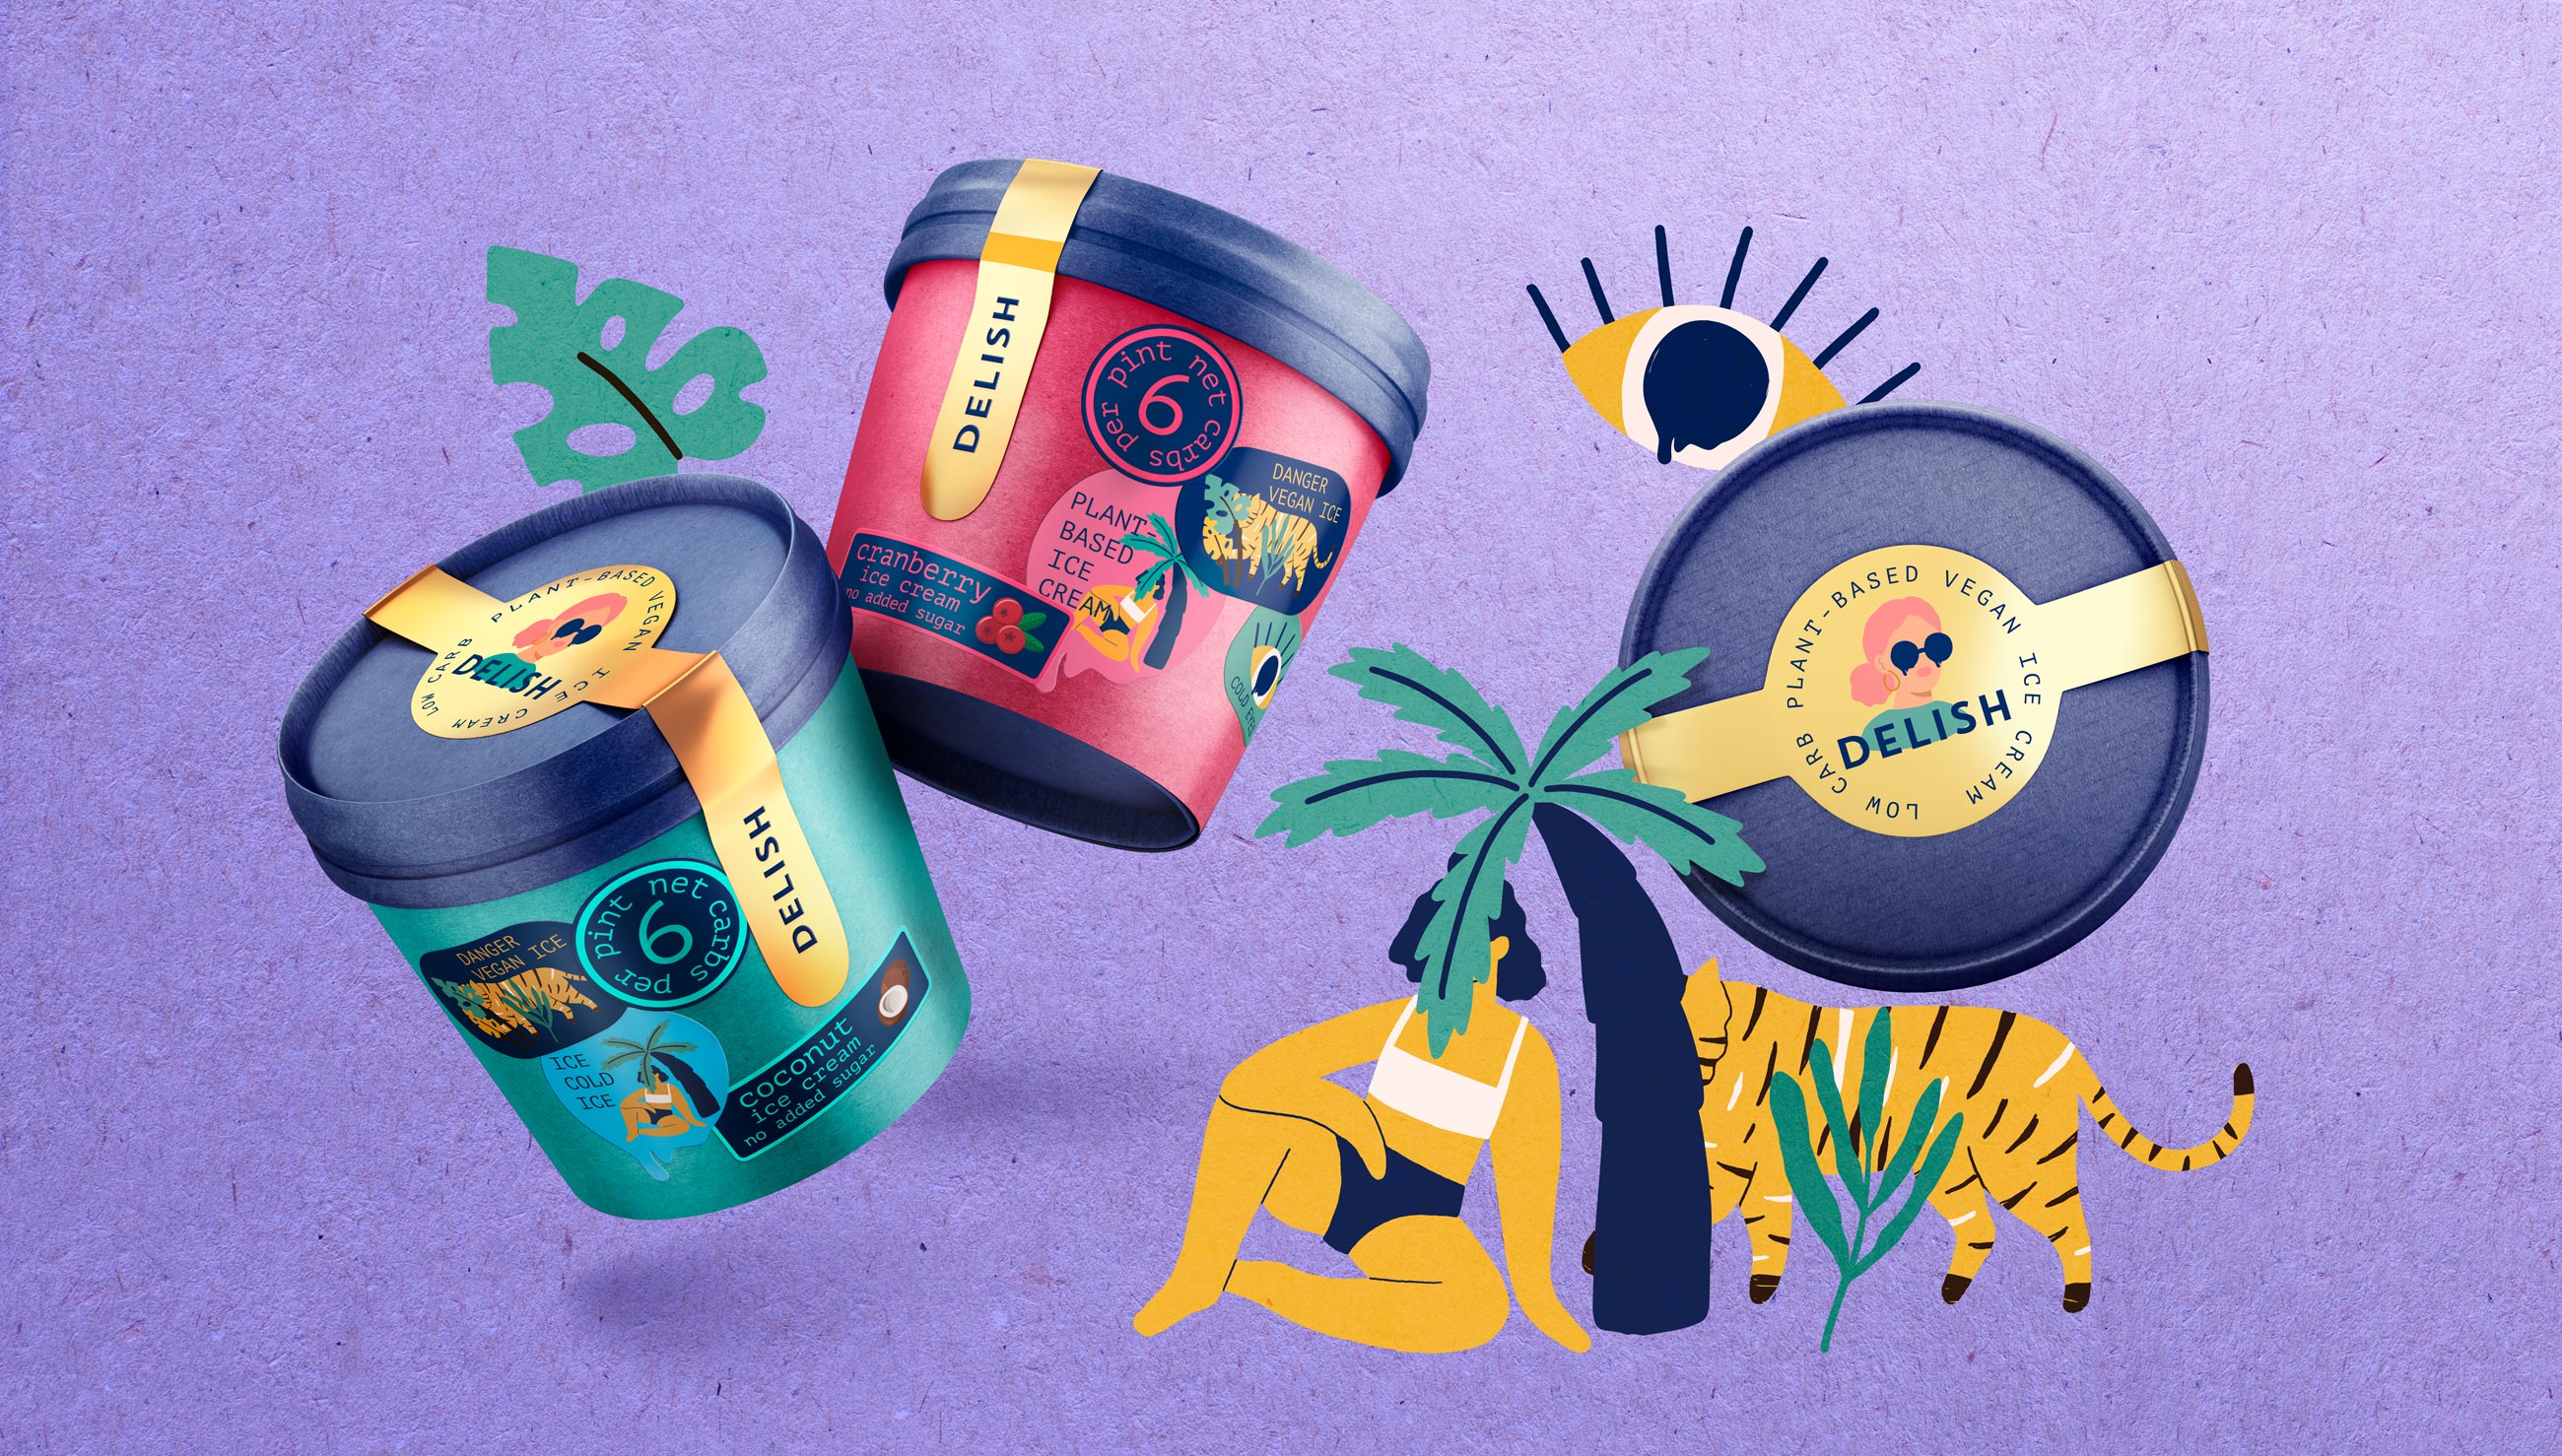 Win Creating Images Deliver Packaging Design and Illustration for Delish Ice Cream